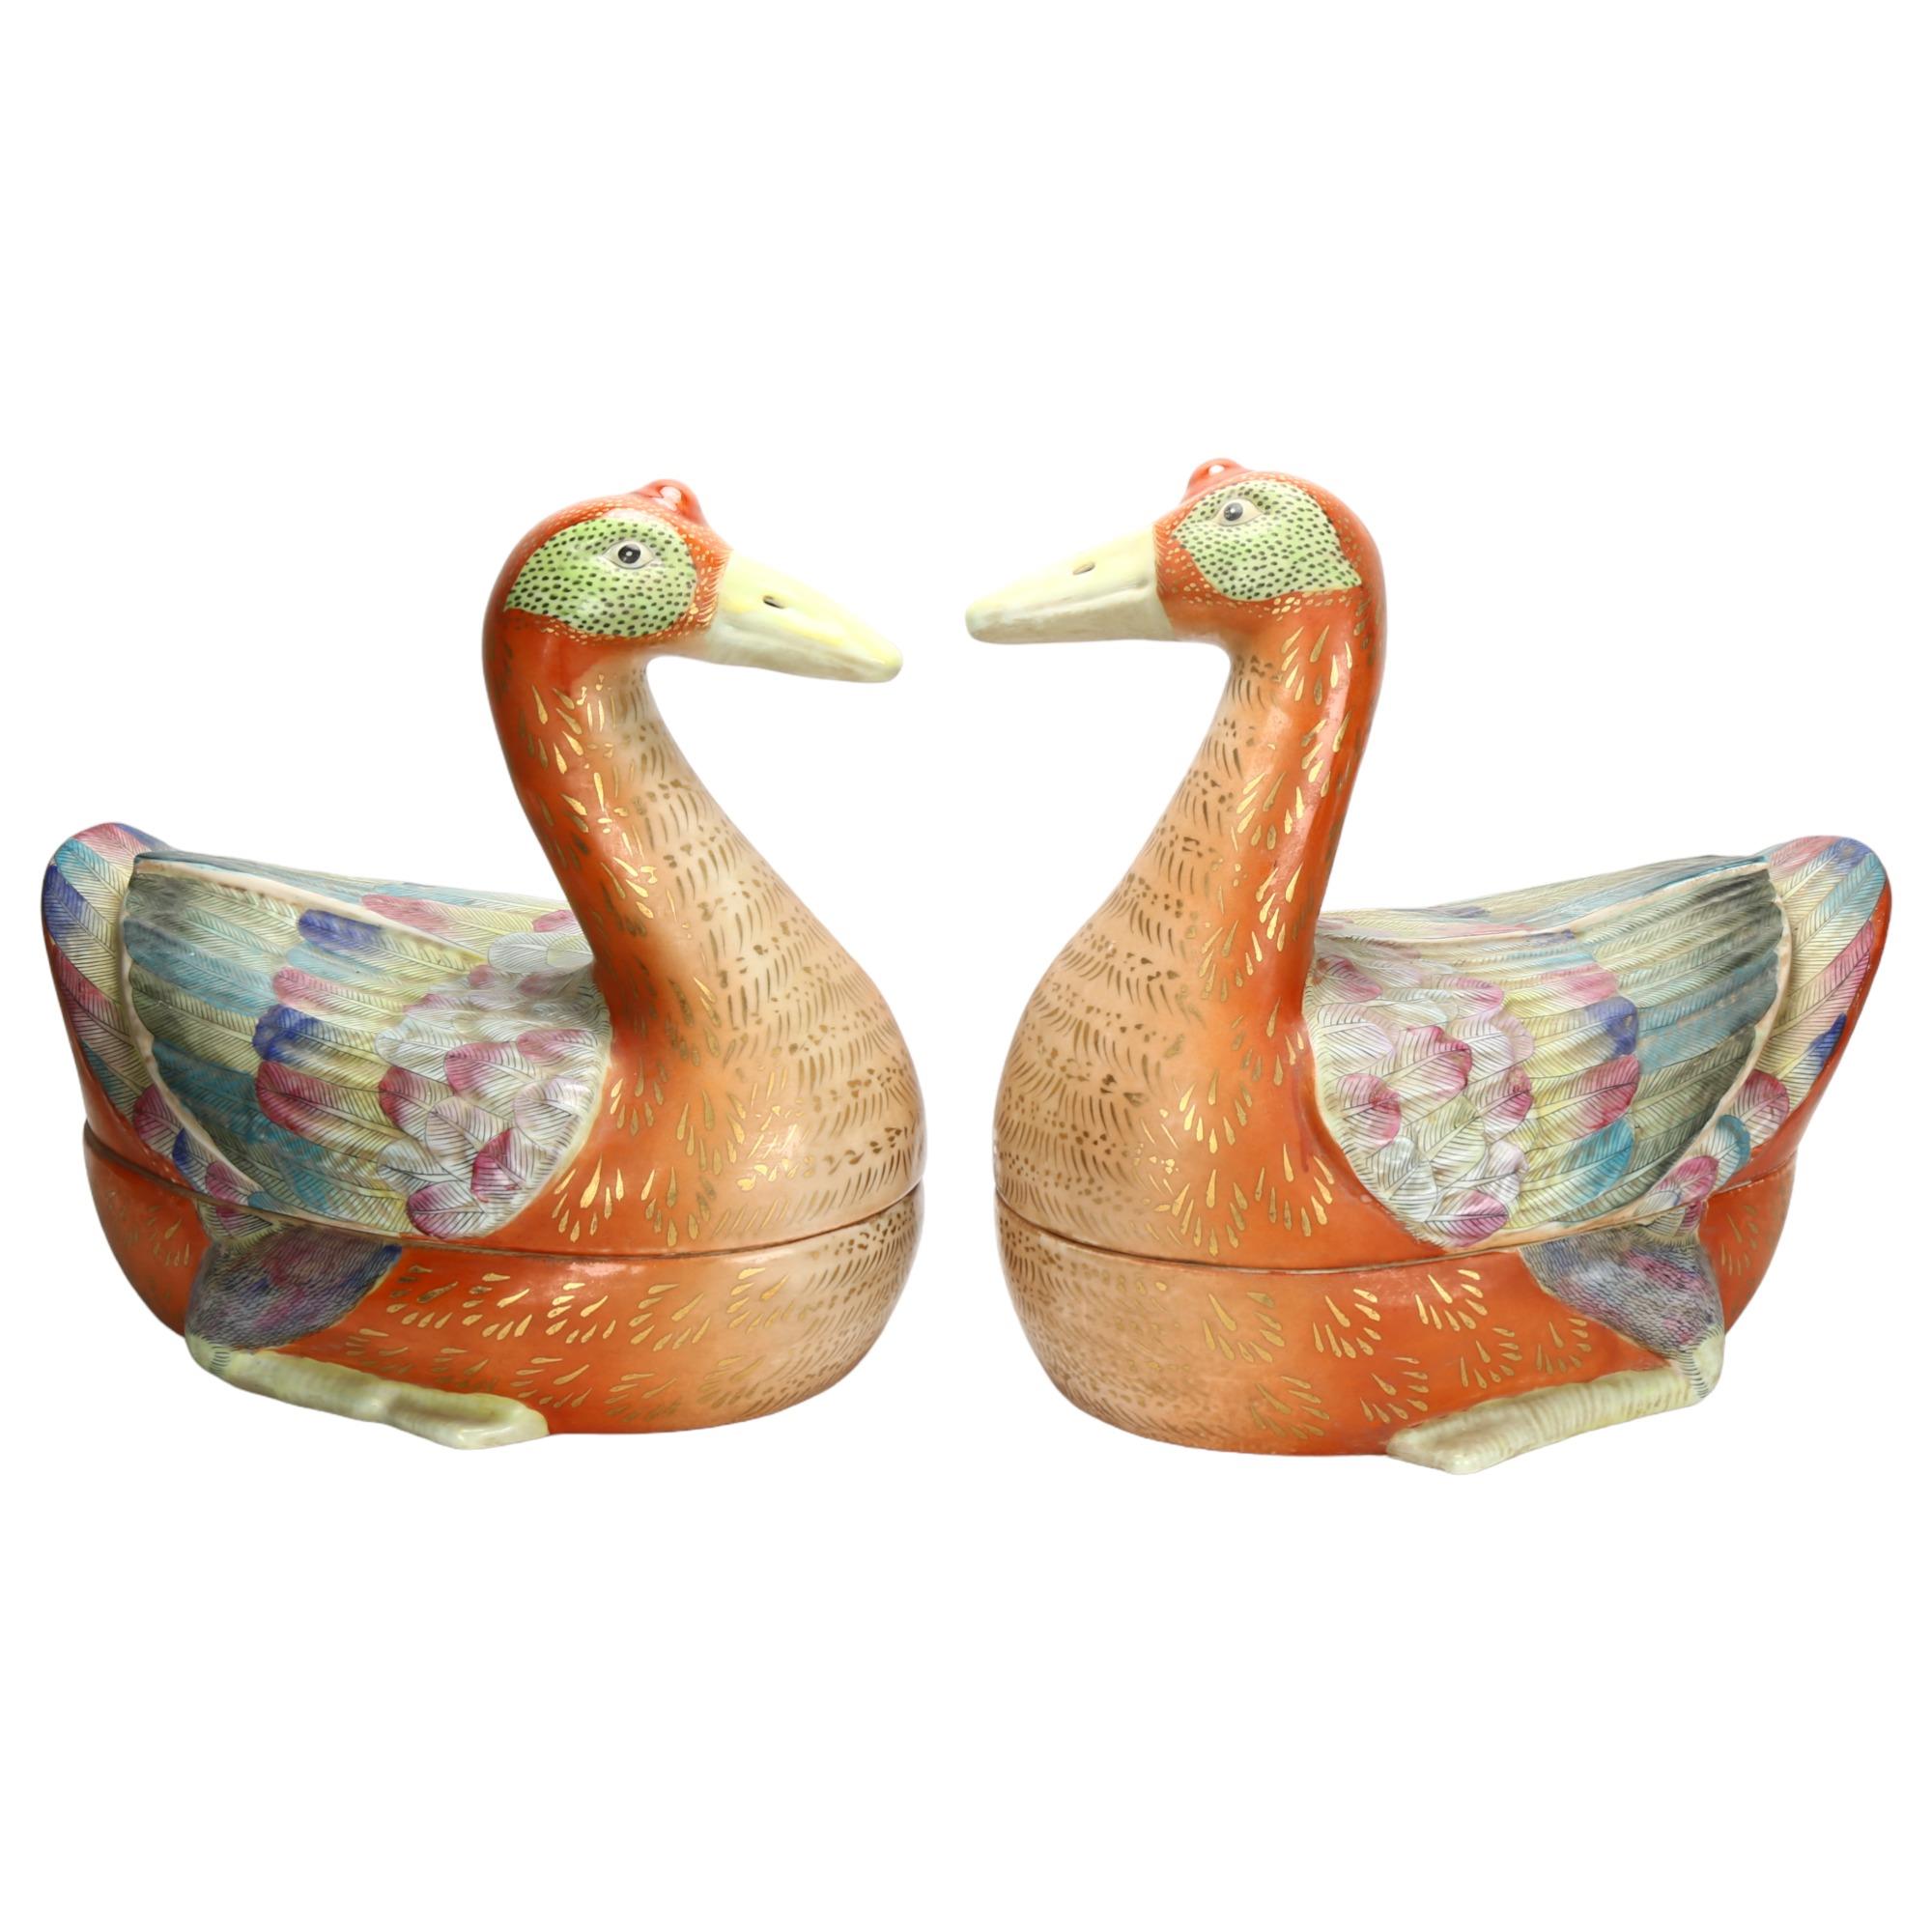 A pair of large Chinese porcelain goose tureen containers, late 19th/ early 20th century, with